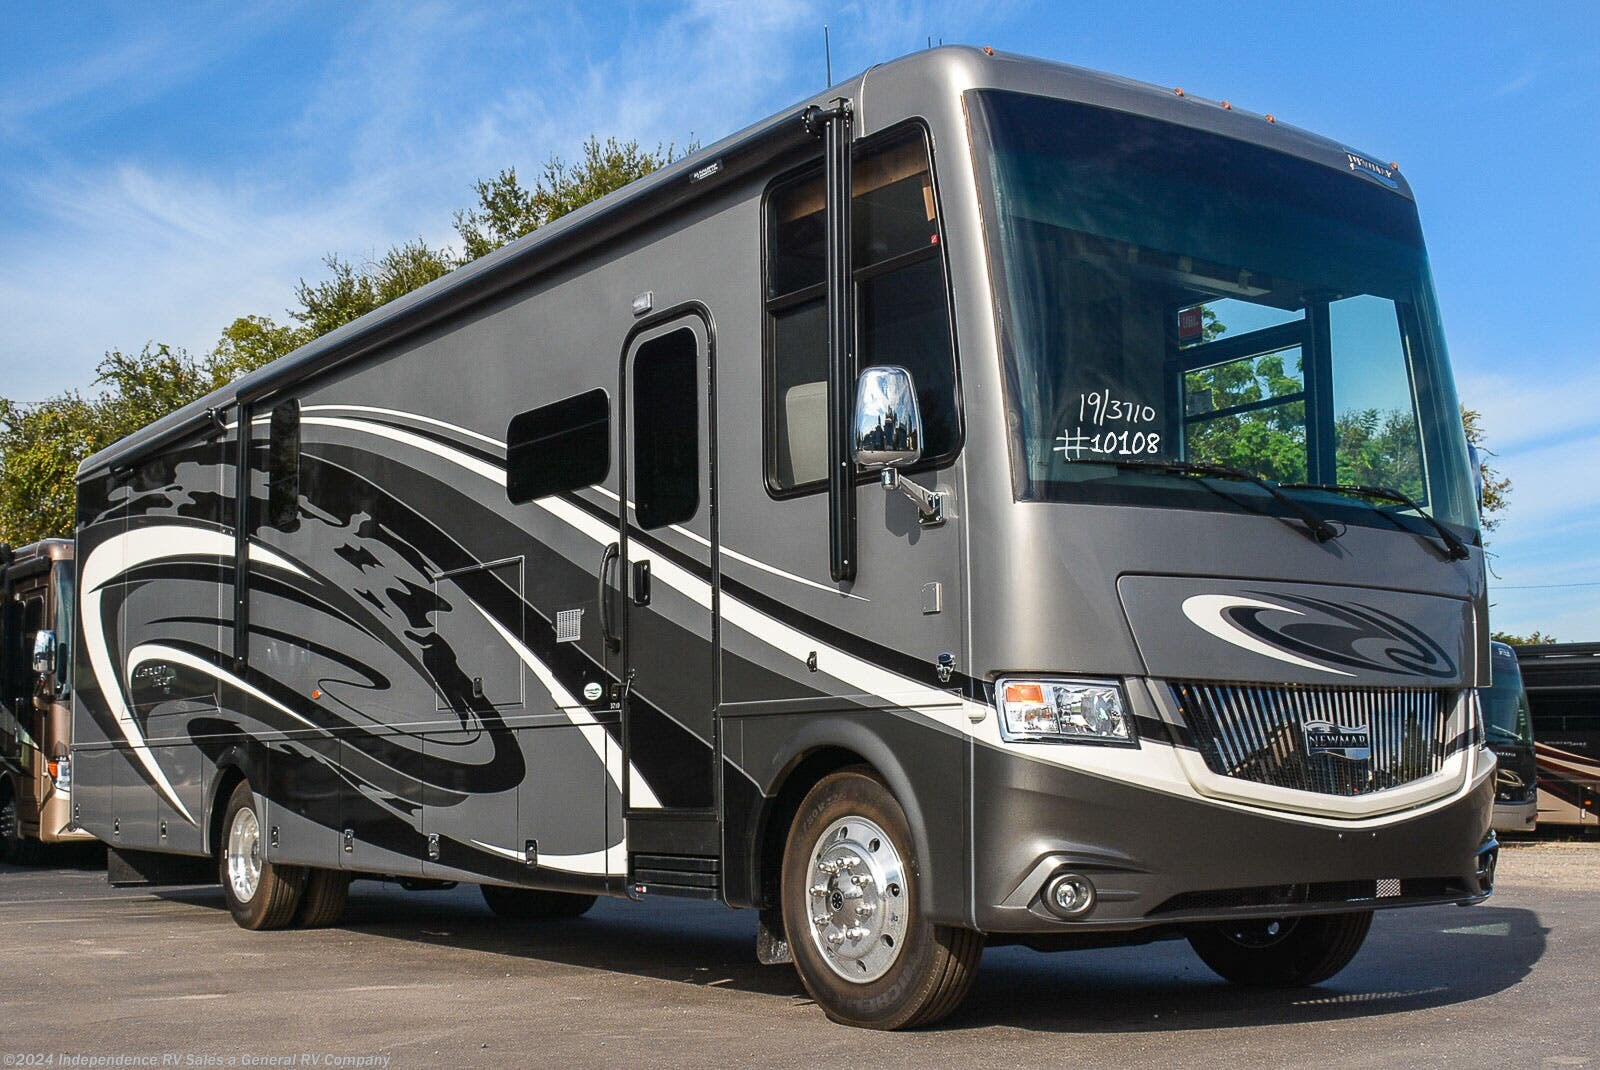 2019 Newmar Rv Canyon Star 3710 For Sale In Winter Garden Fl